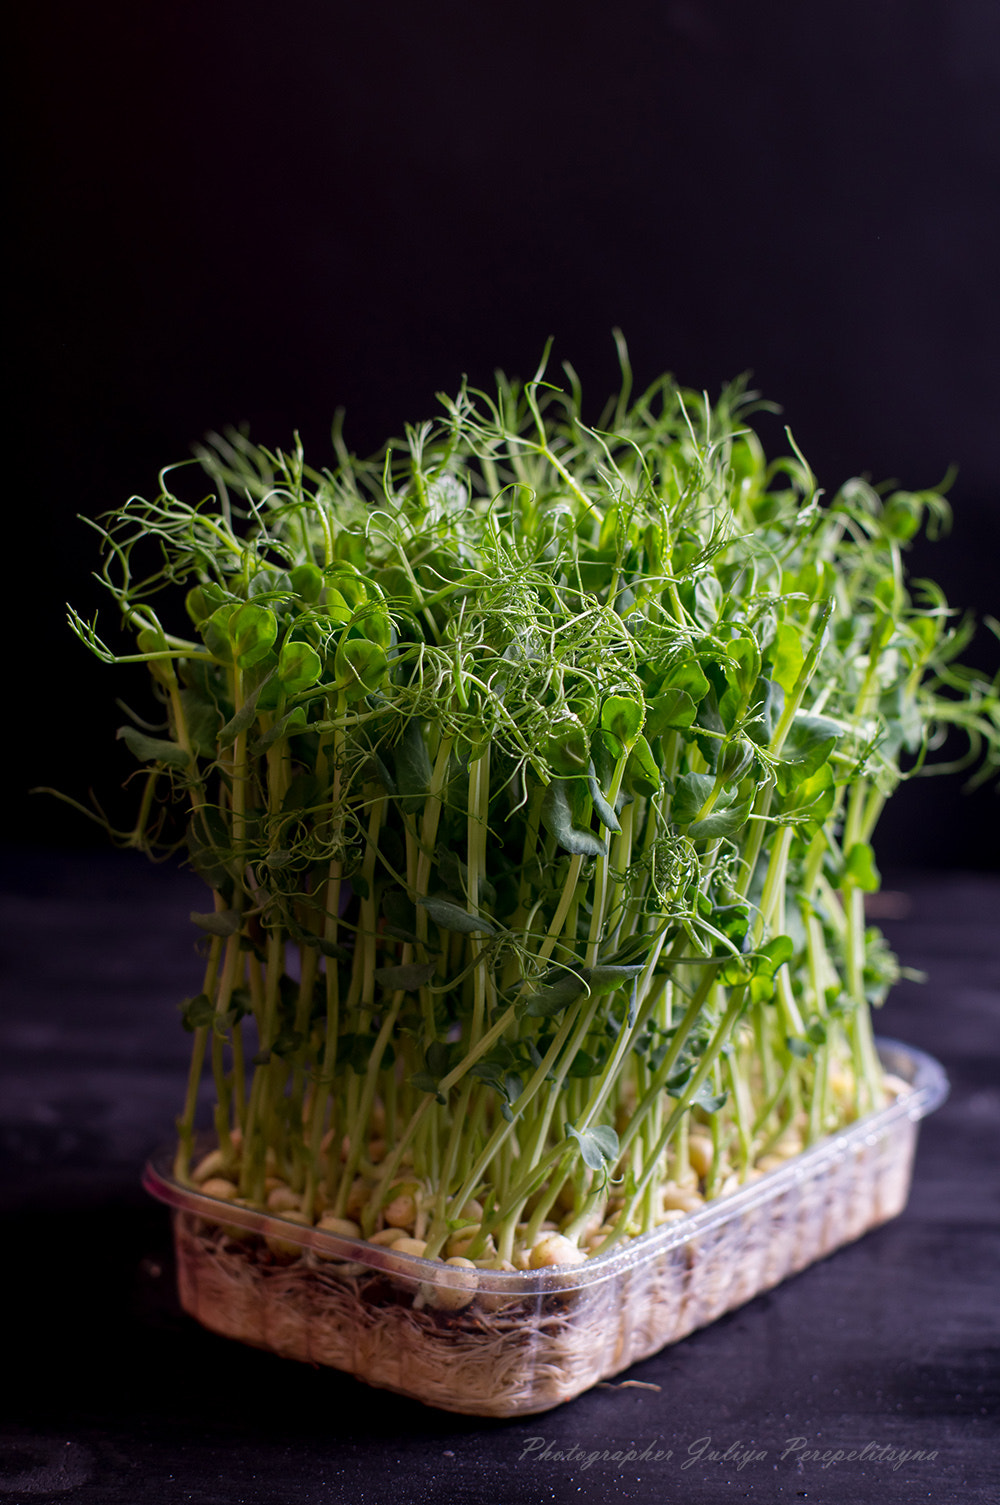 Sony SLT-A37 sample photo. Green pea sprouts photography